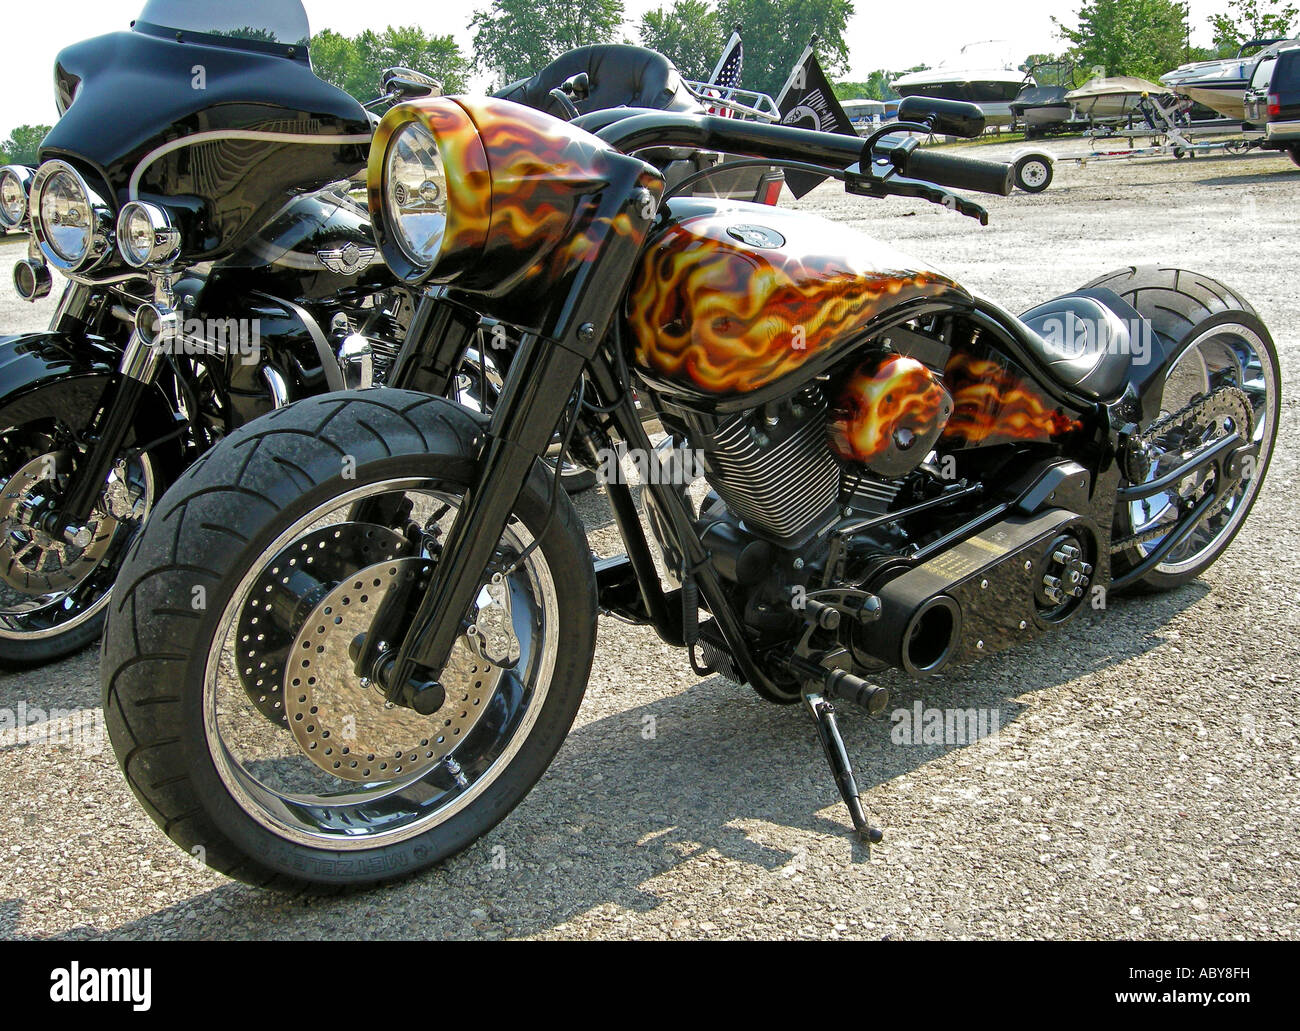 flame designs for motorcycles